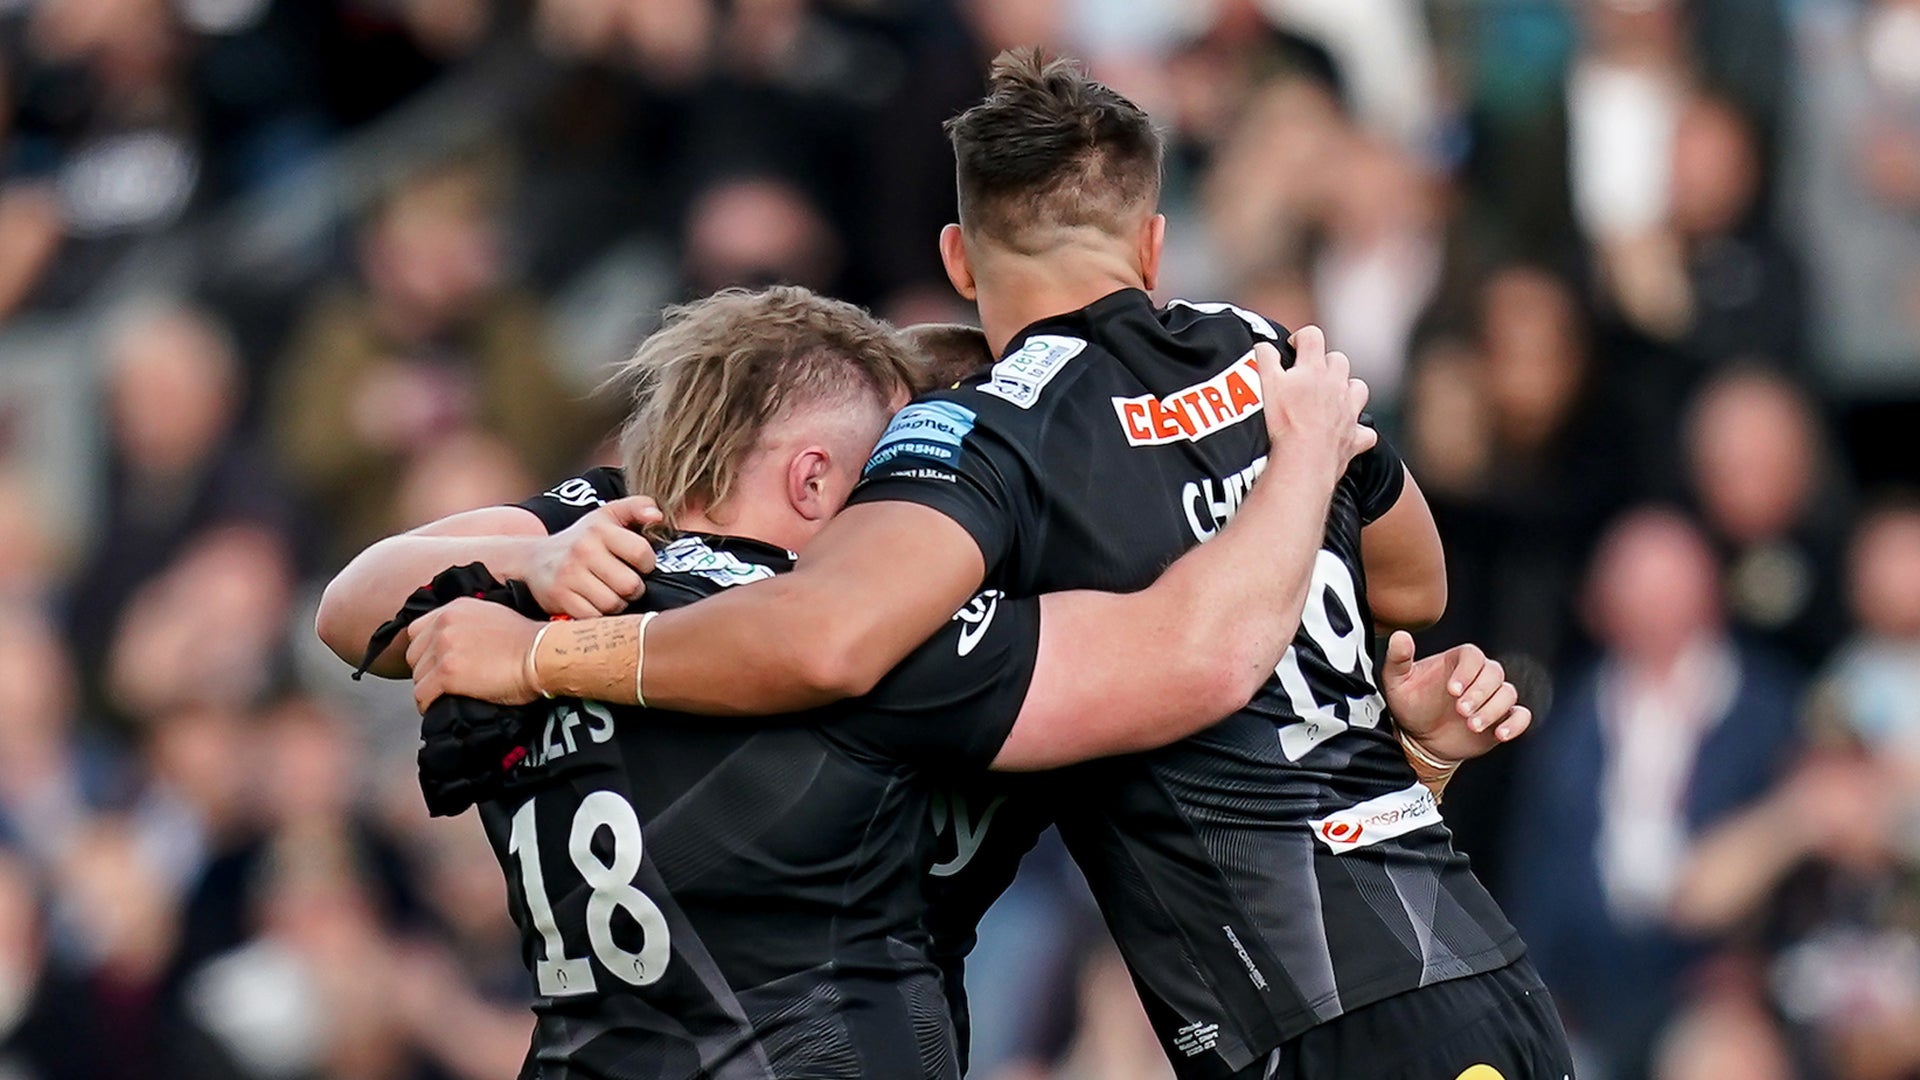 EXETER CHIEFS AND SAMURAI CONTINUE LONGEST STANDING PARTNERSHIP IN PREMIERSHIP RUGBY HISTORY